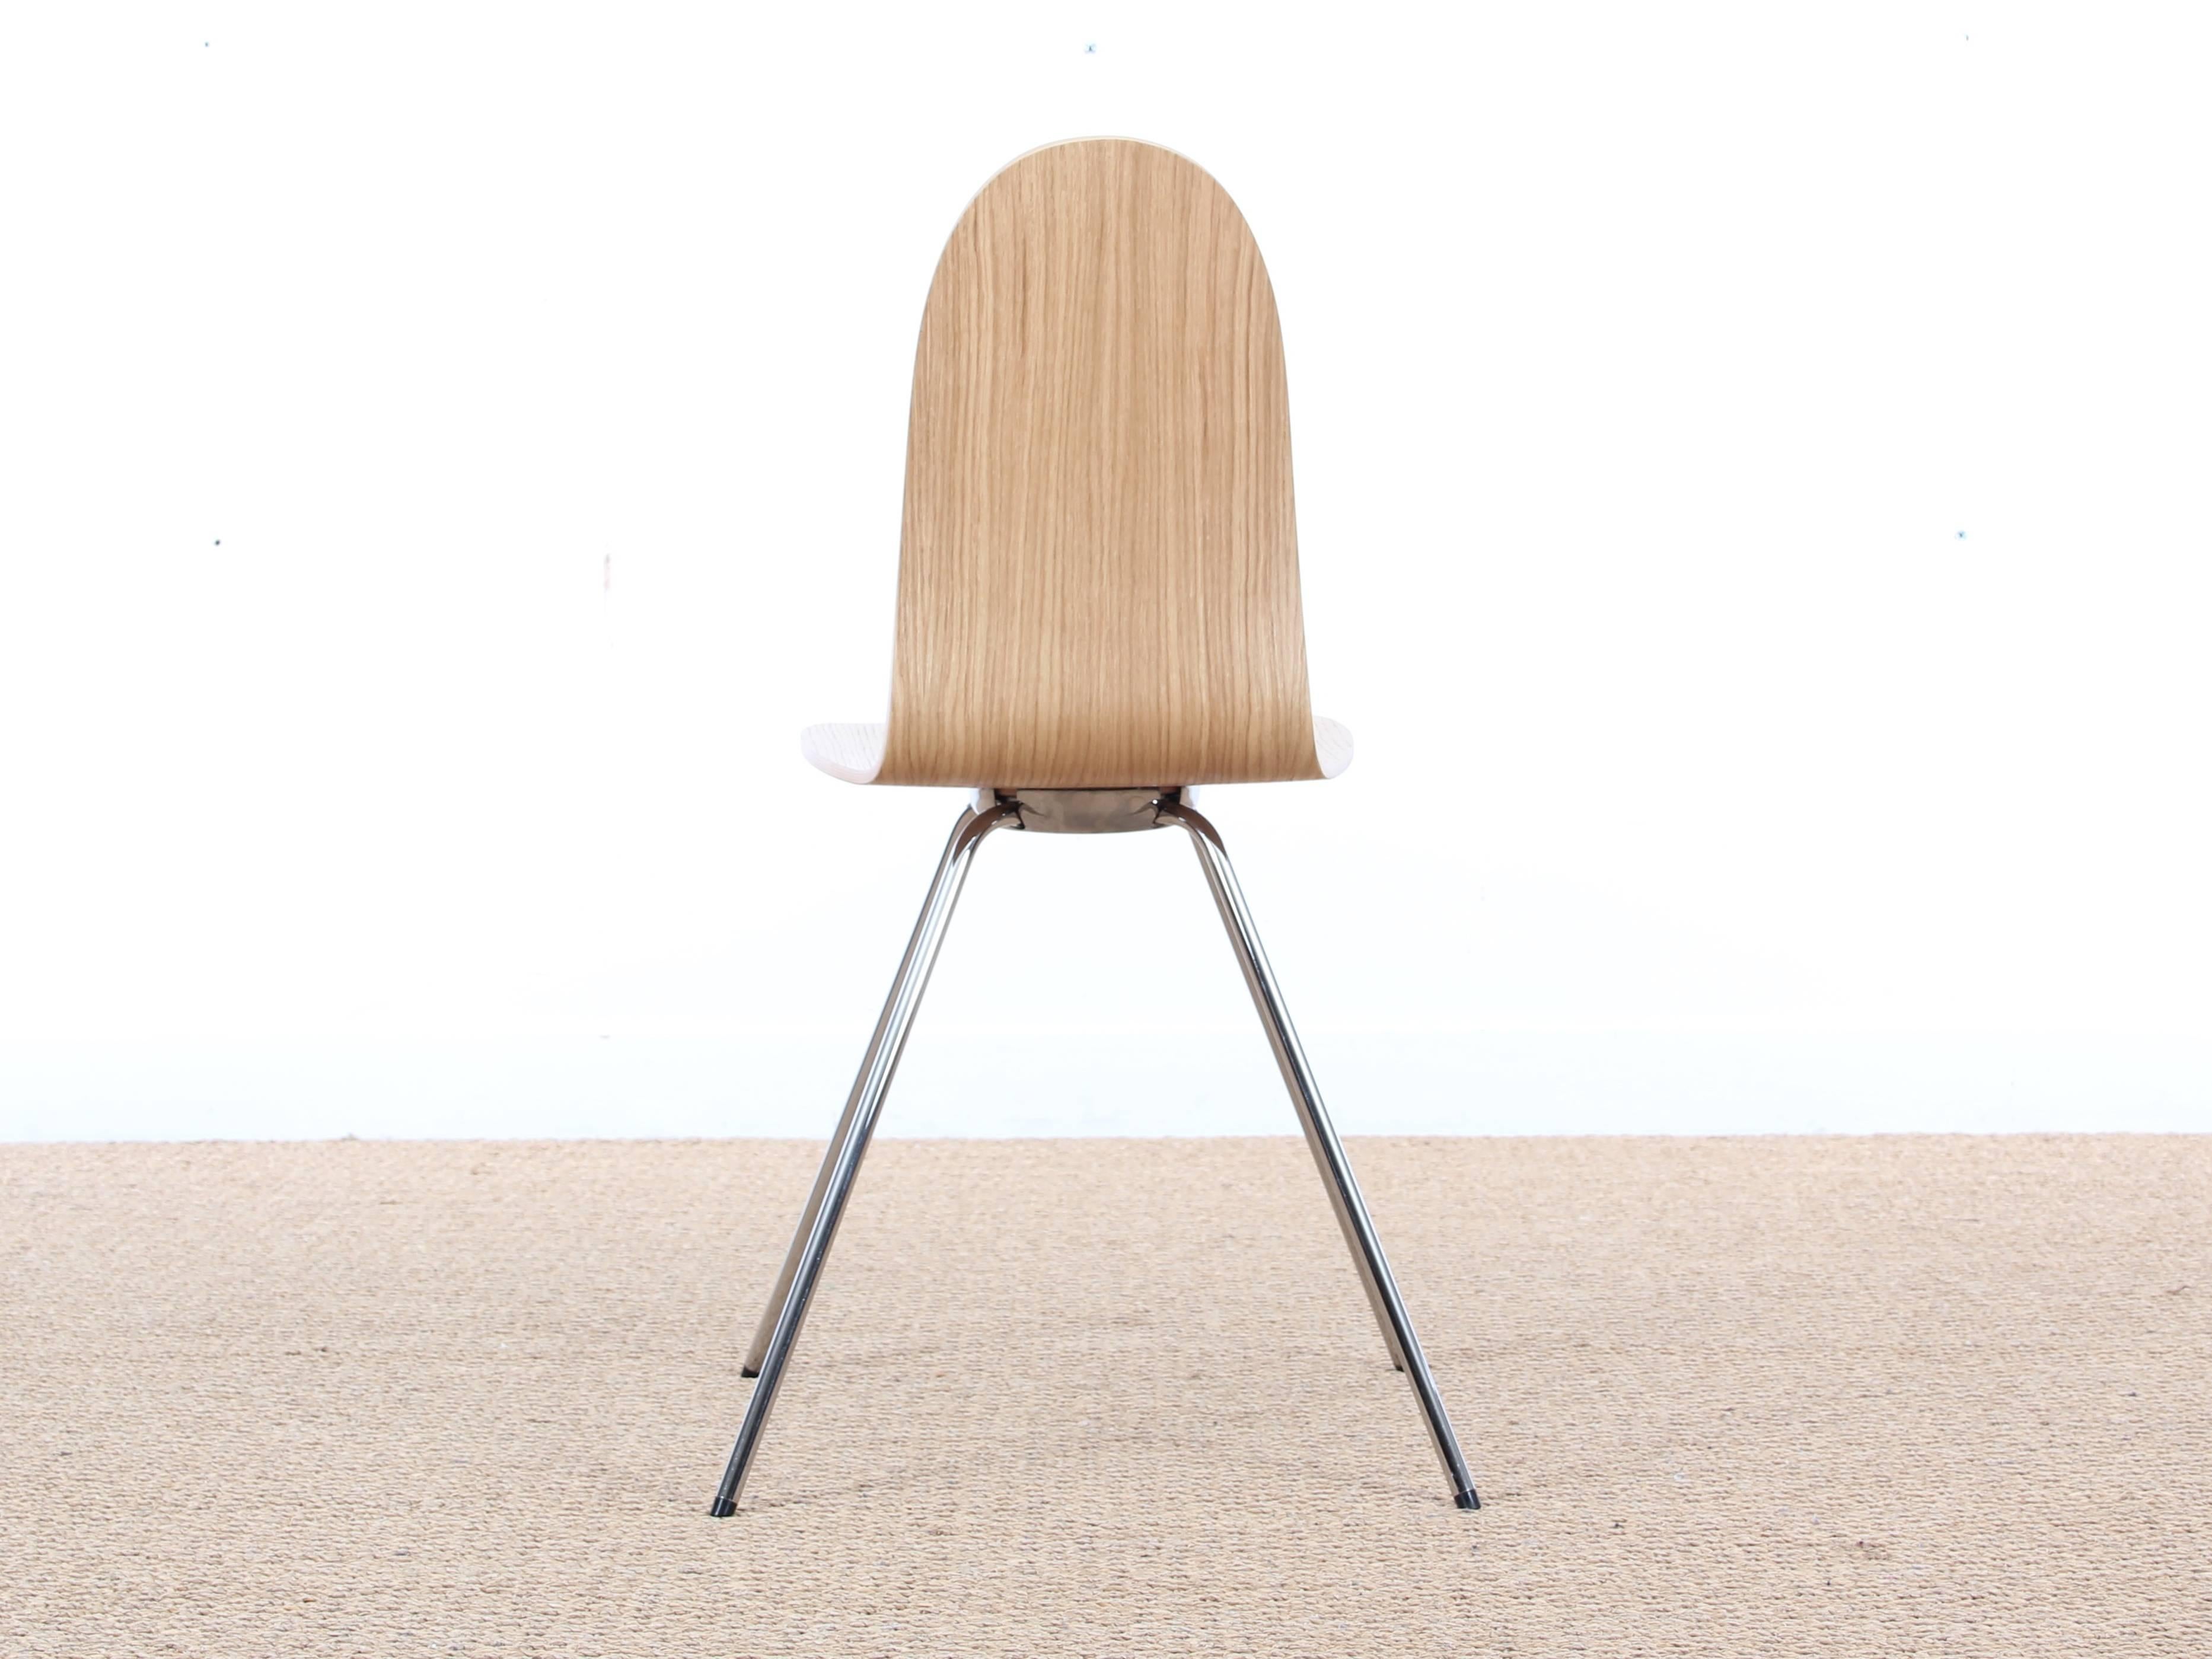 Stained Tongue Chair in Ash by Arne Jacobsen, New Releases For Sale